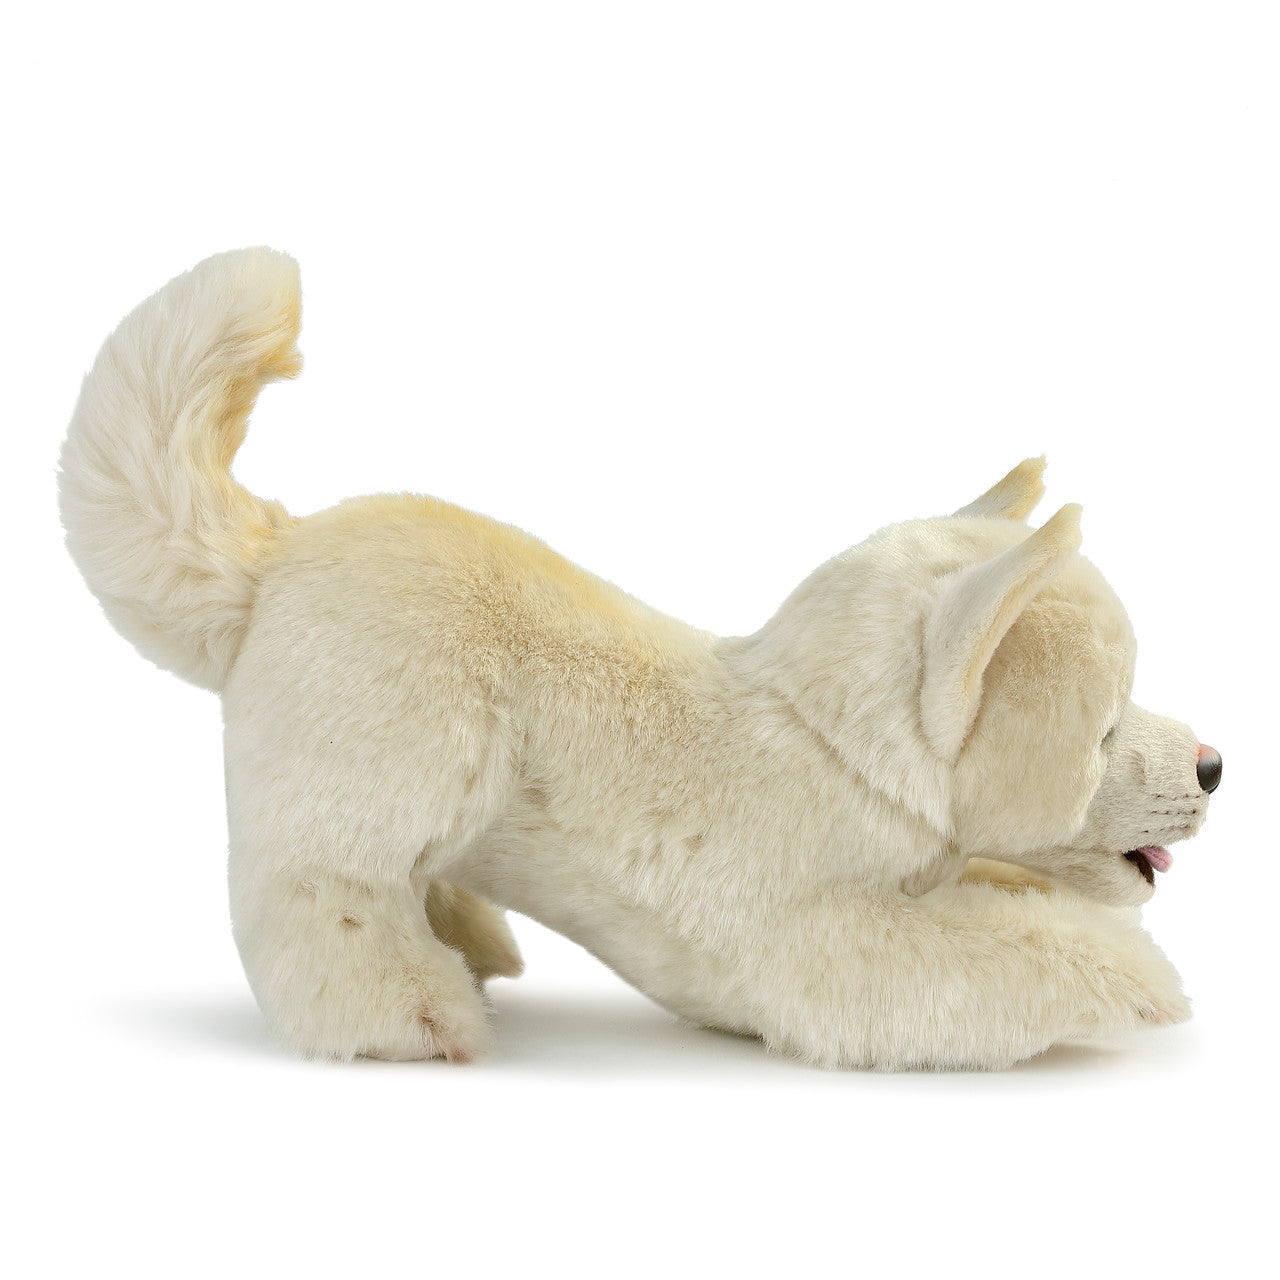 White Mix Rescue Breed Plush Toy - small/med